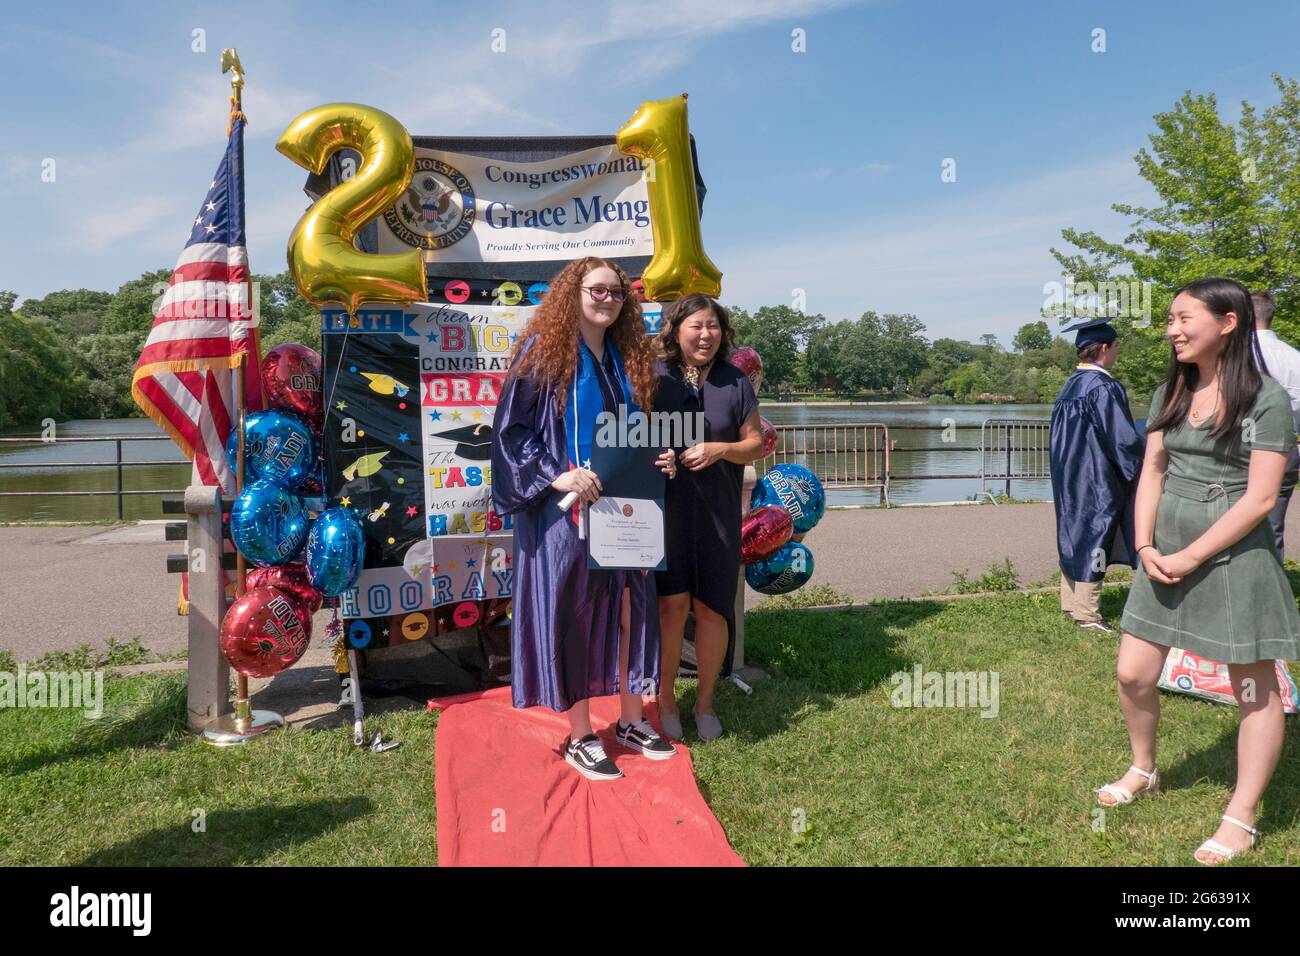 With graduations severely curtailed by covid, Congresswoman Grace Meng invited students to an outdoor celebration. In a park in Queens, New York. Stock Photo